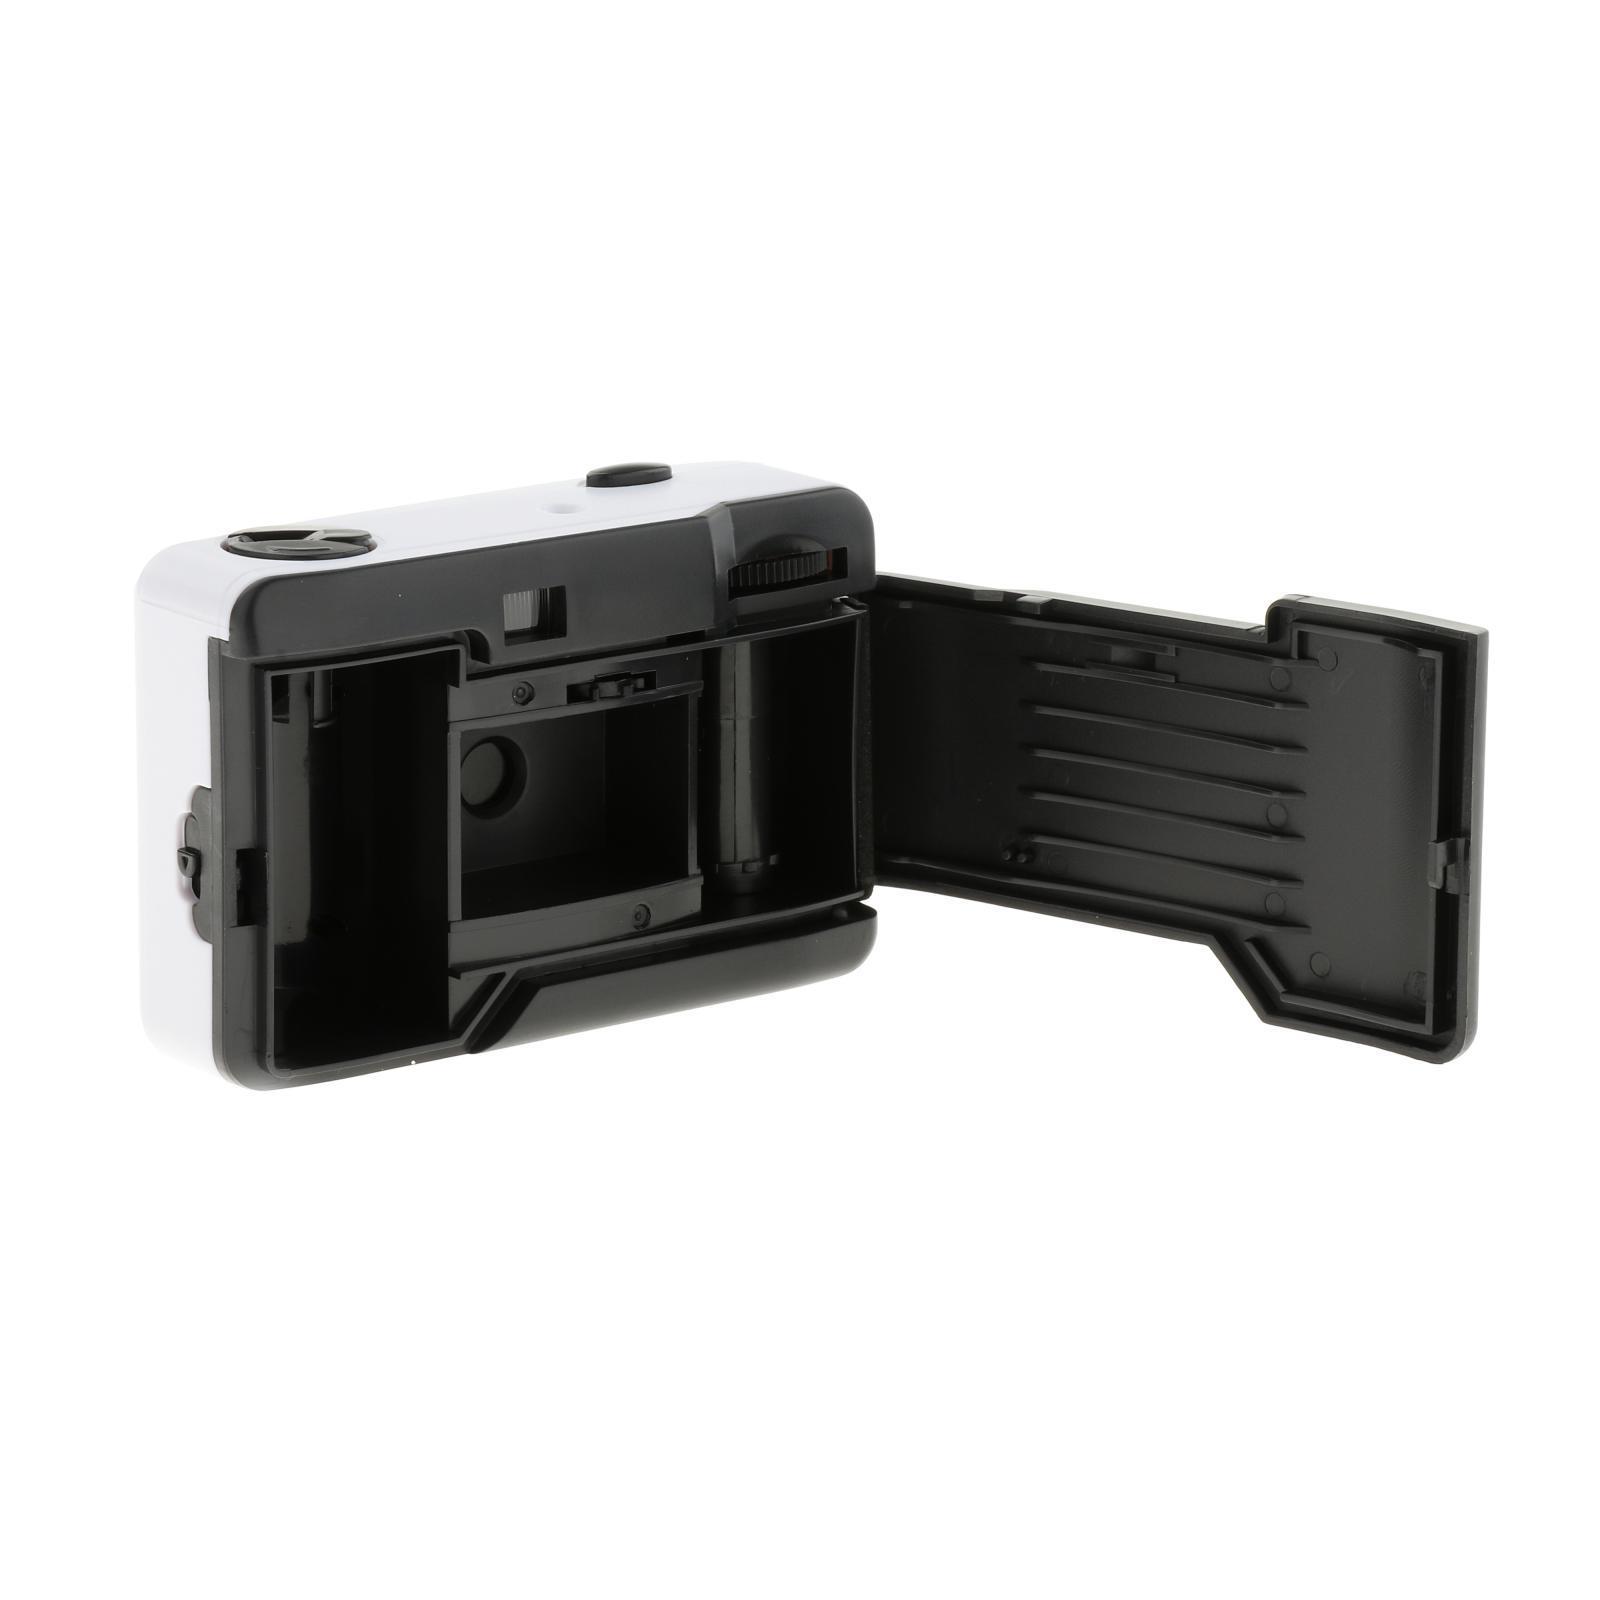 Compact Mini Camera Cute 35mm Film Parts for Photography Surfing Black Case